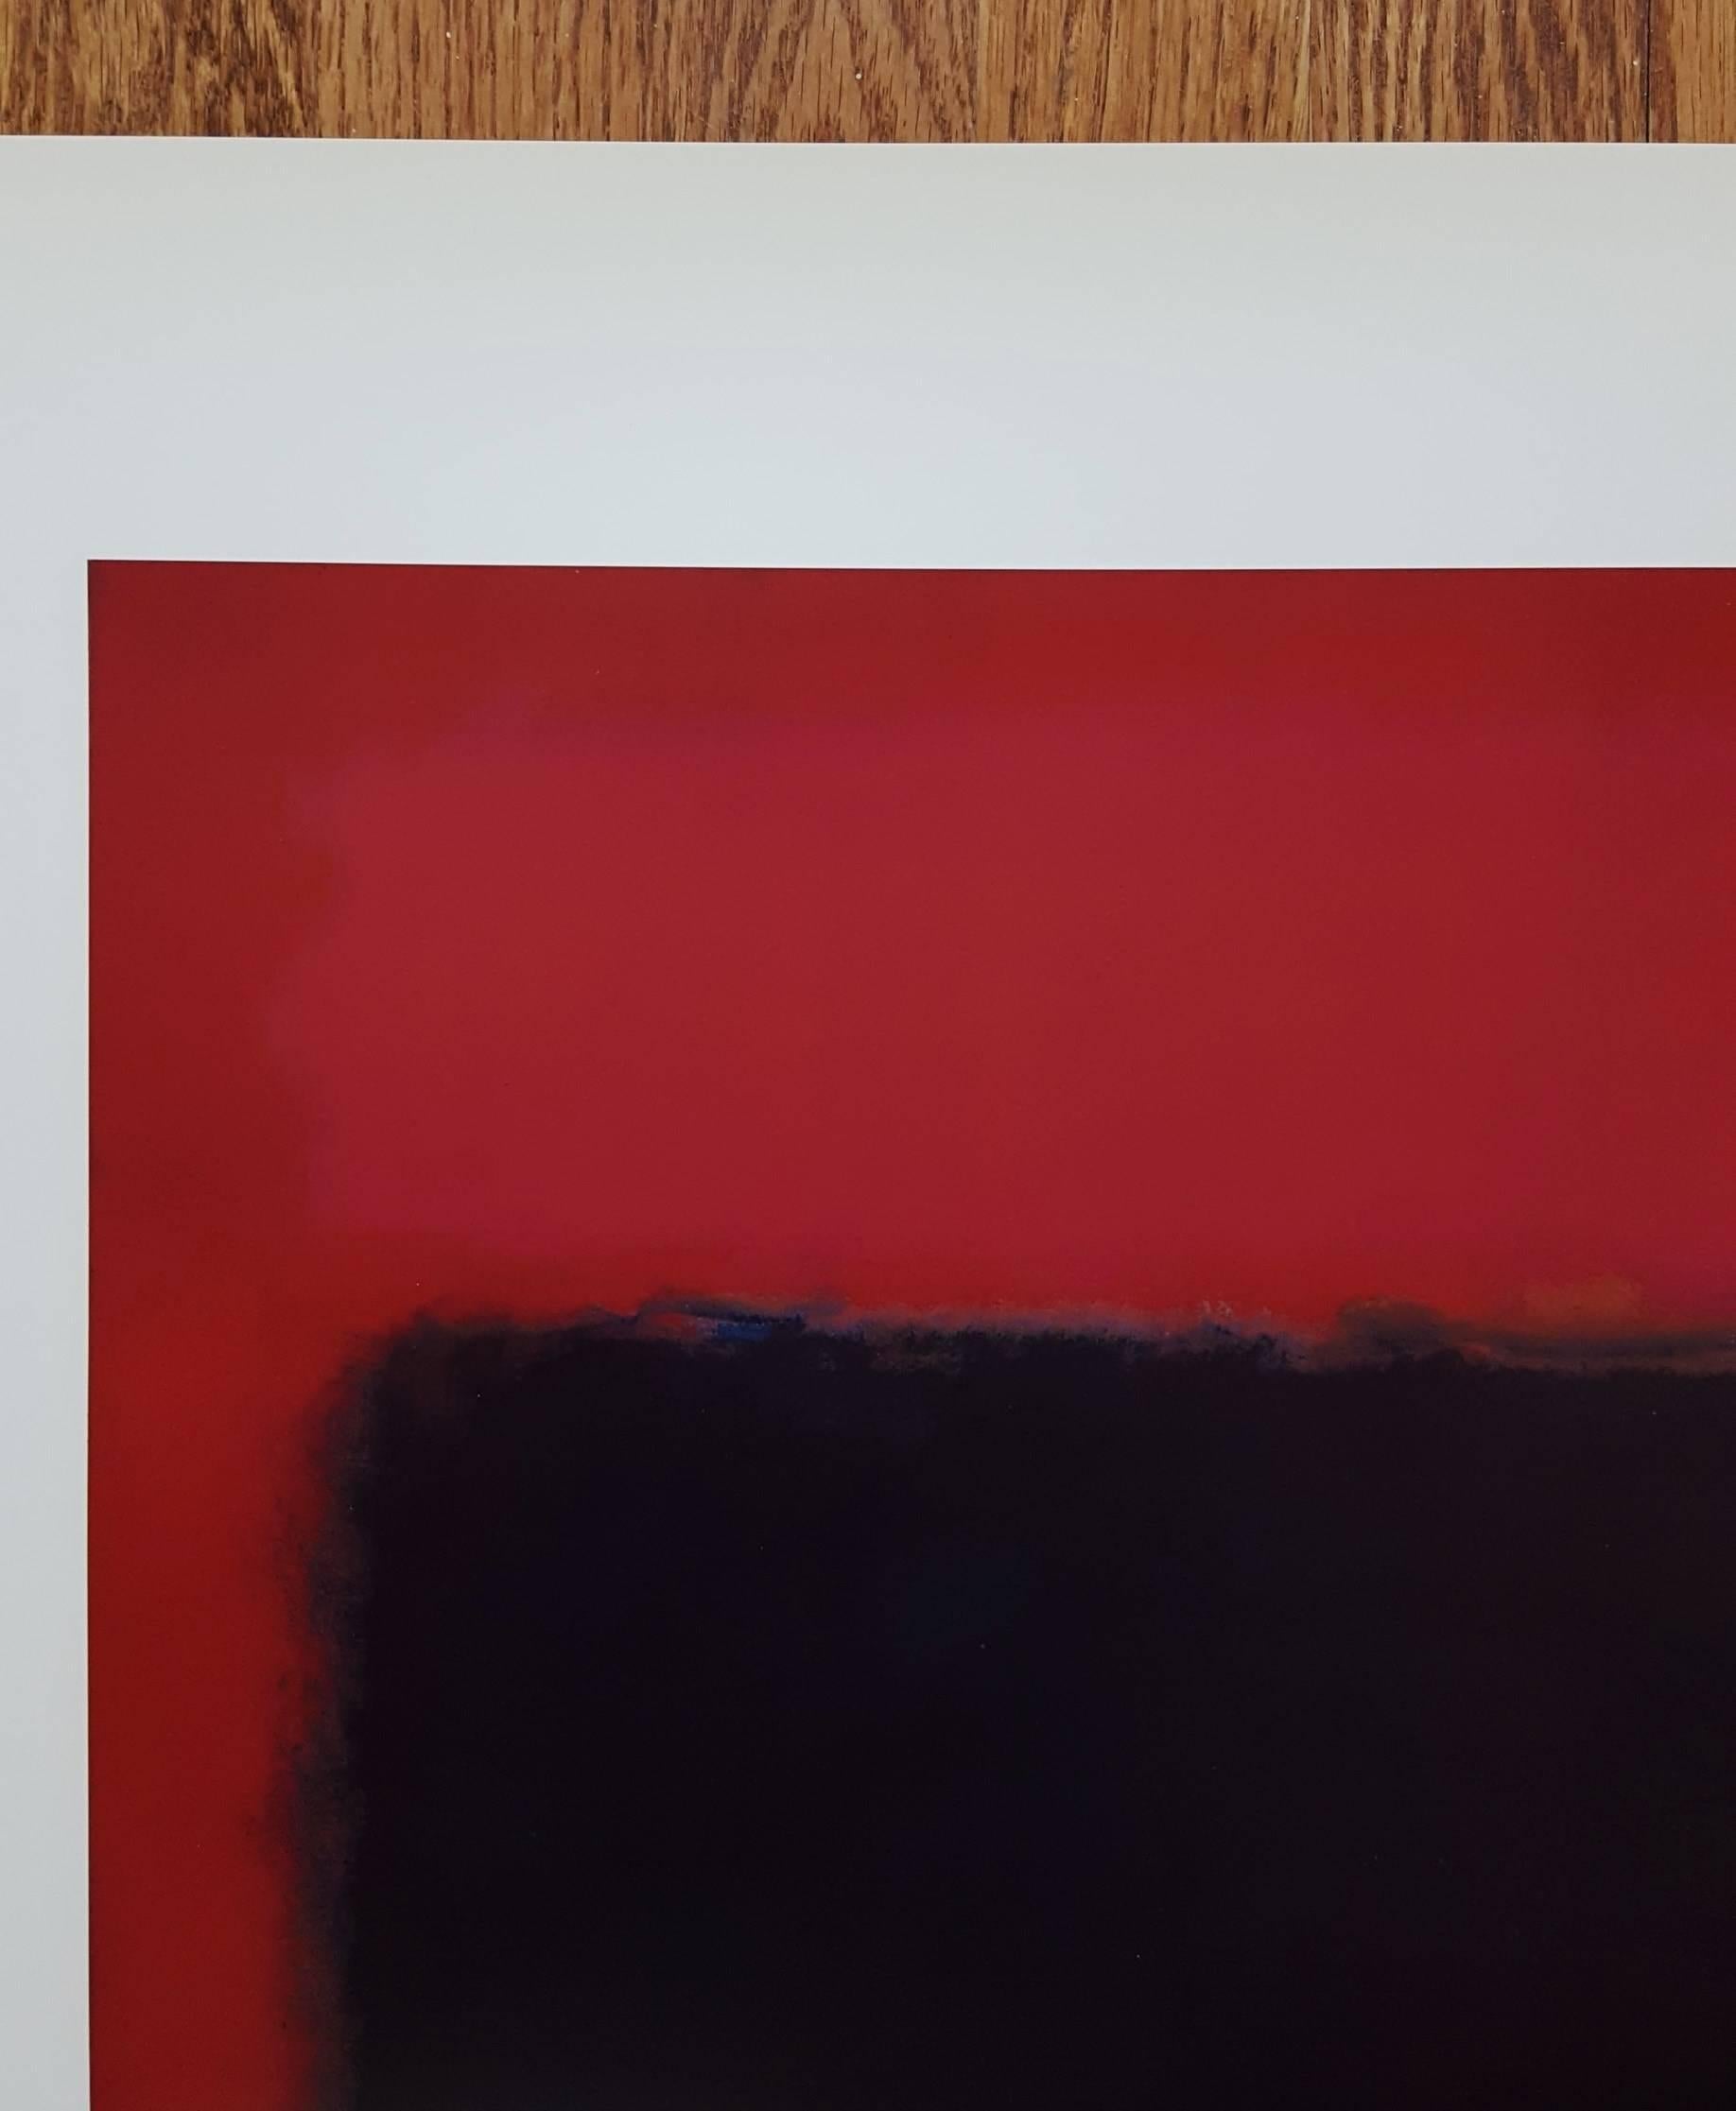 Light Red Over Black - Abstract Expressionist Print by (after) Mark Rothko